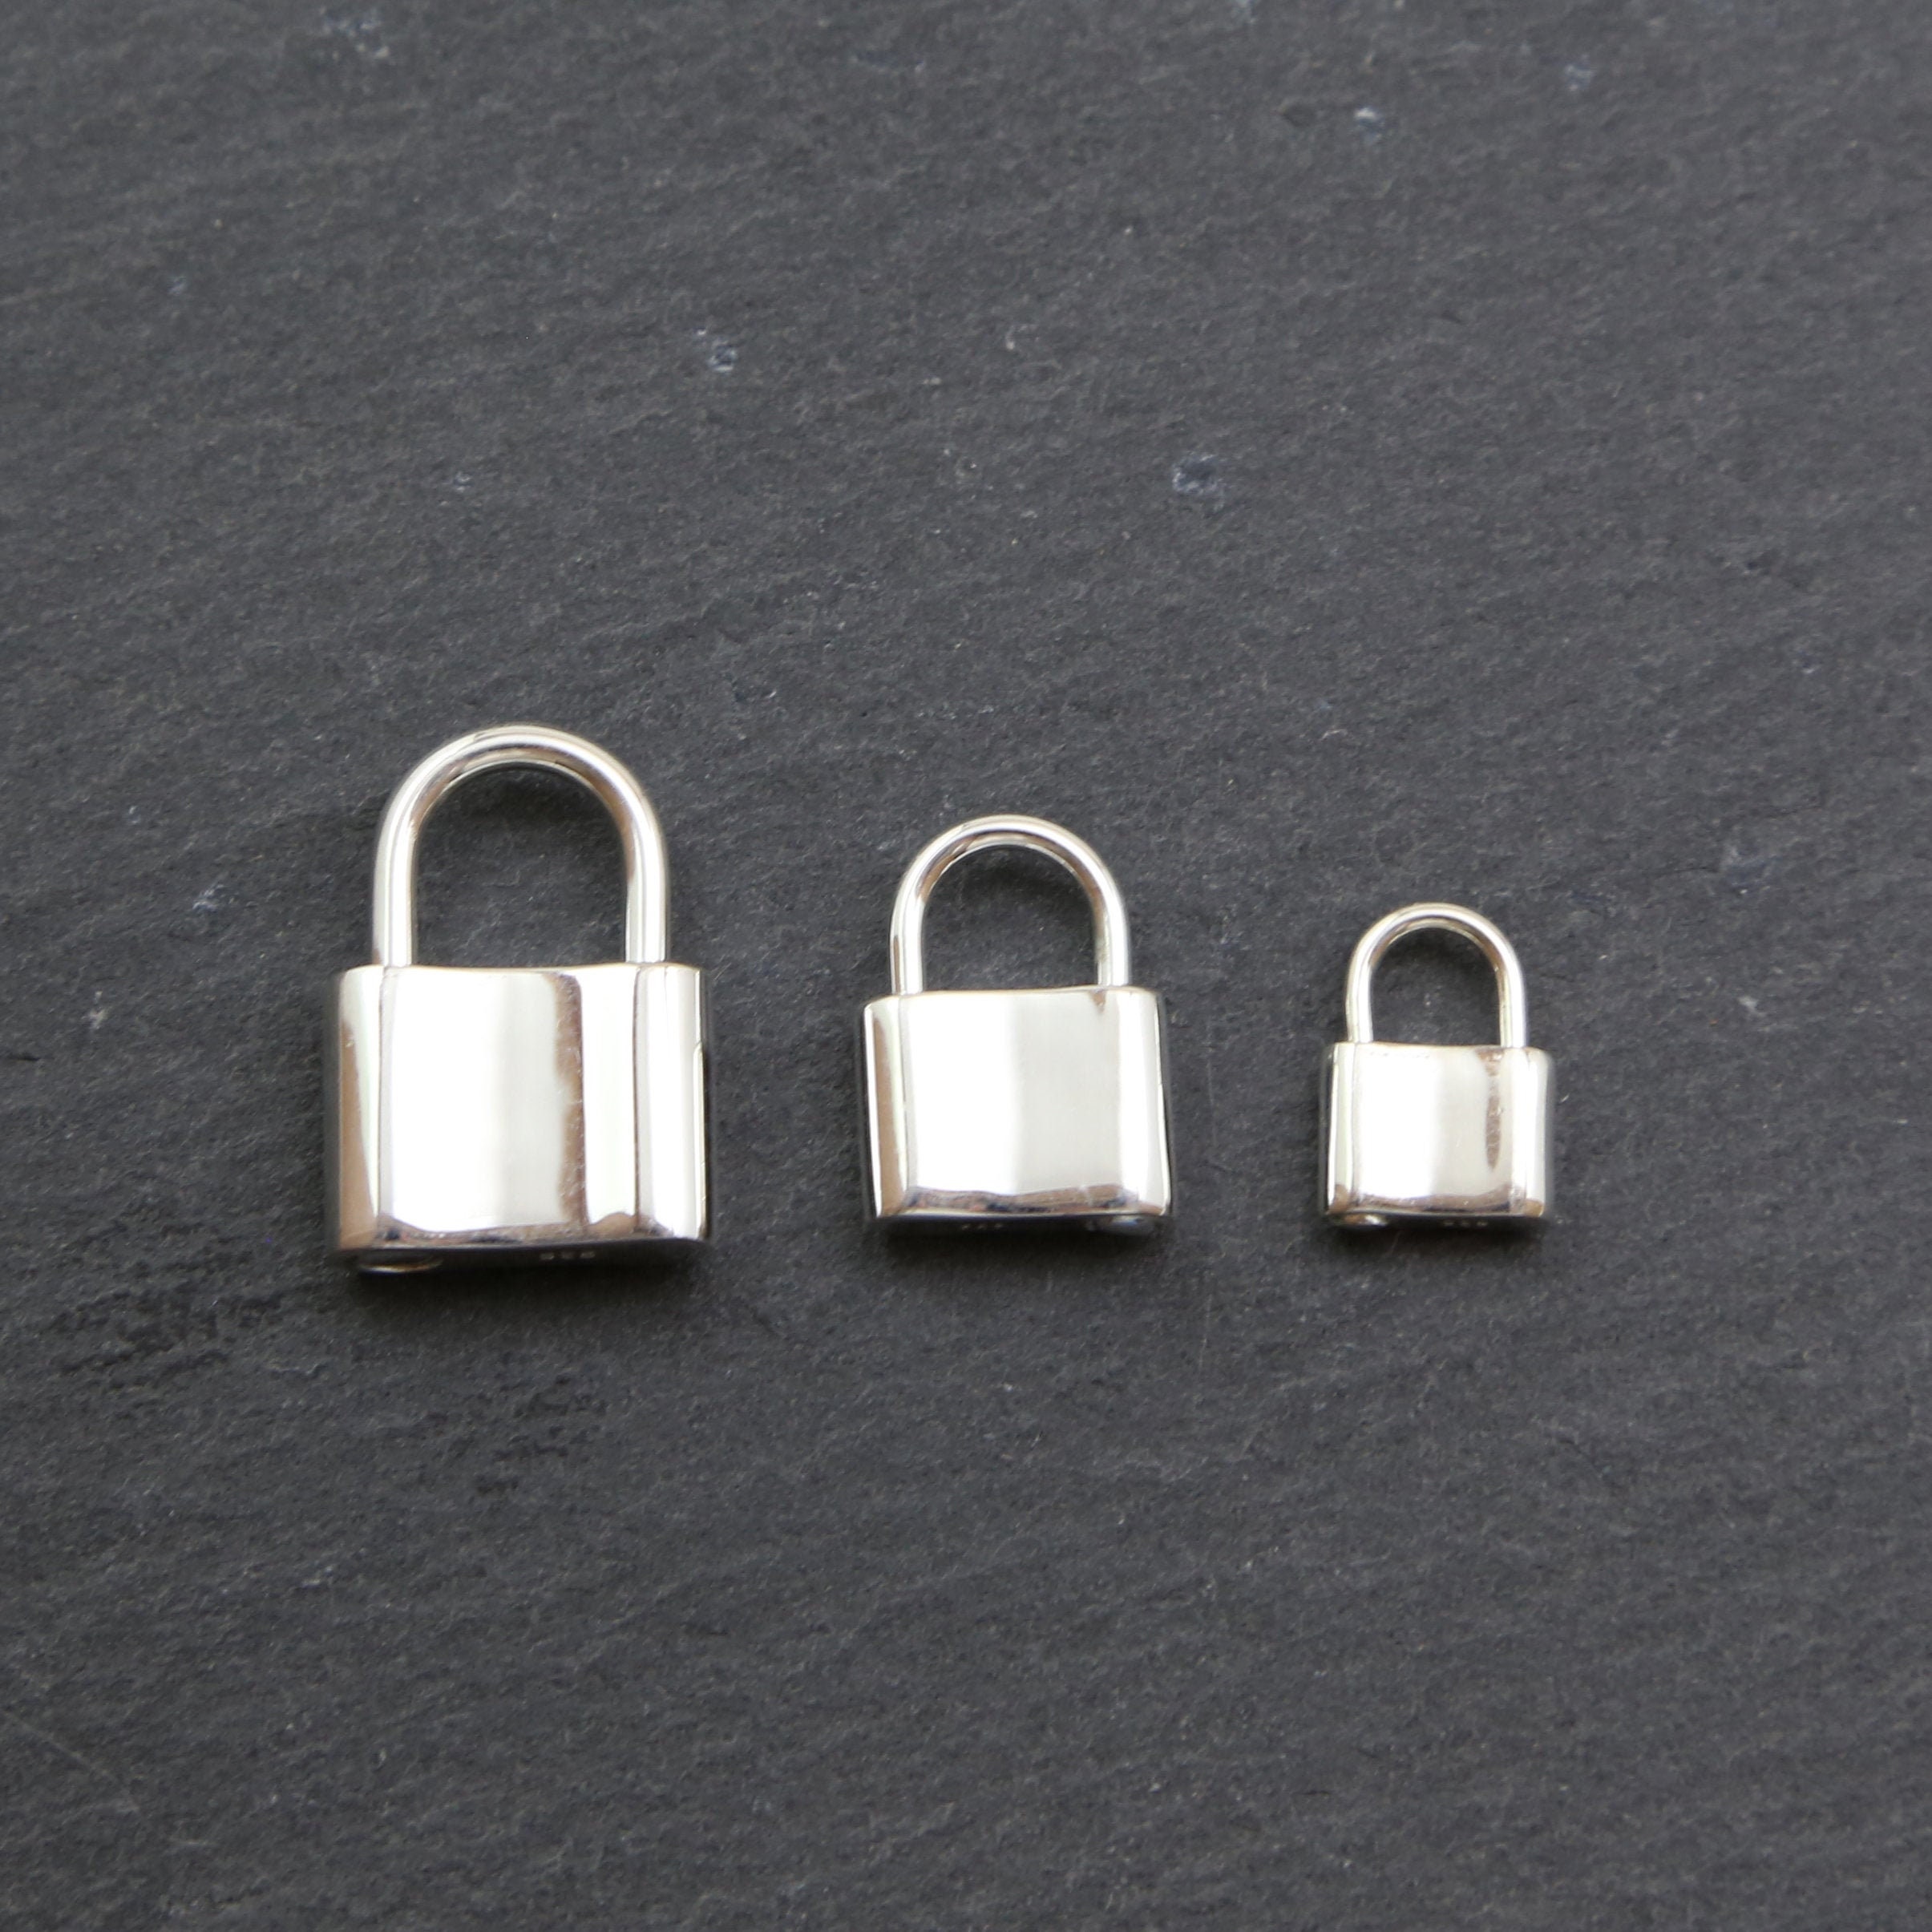 Sterling Silver 925 Padlock Pendant Charm For Charms Bracelet Or Necklace A27P 